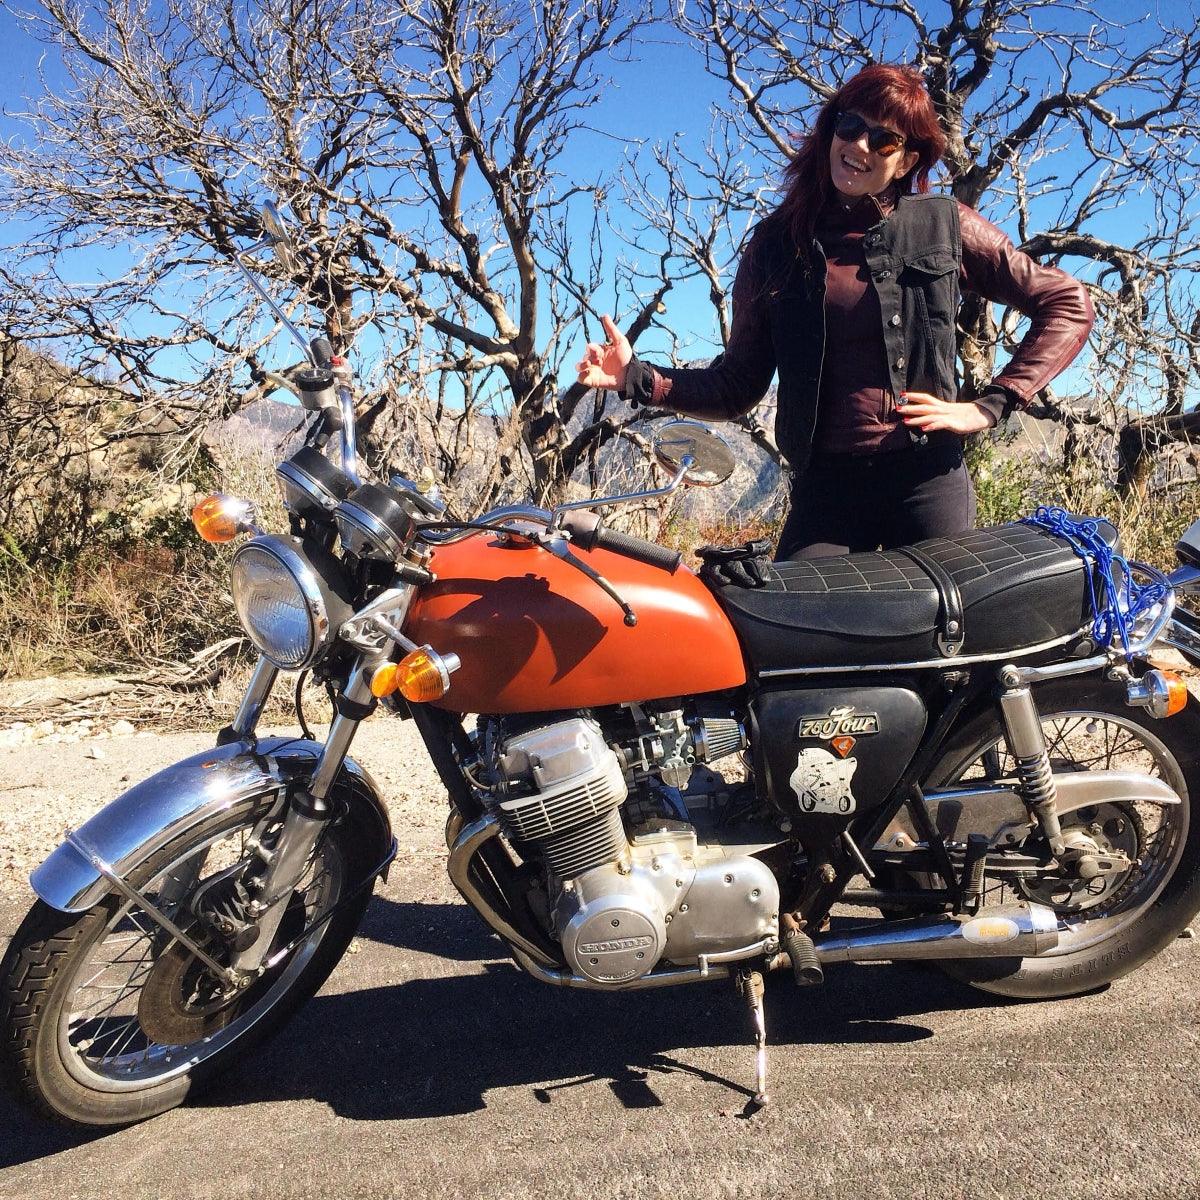 An Interview With Jessie Gentry, The Velvets MC's Co-Founder